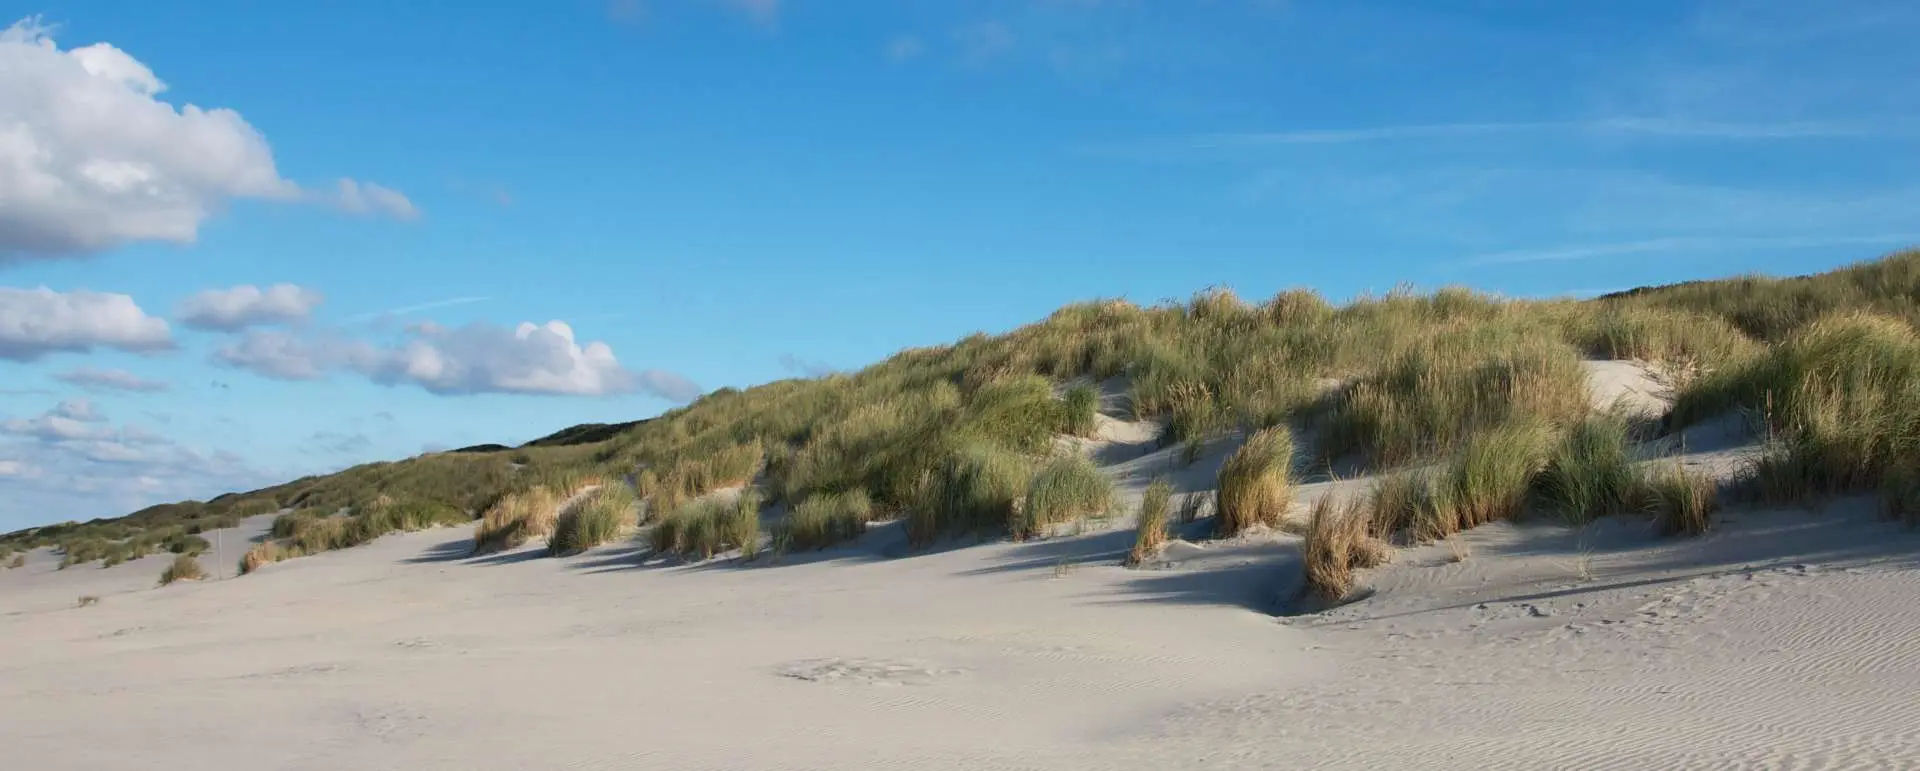 East Frisian Islands - Architecture tours ideal for groups